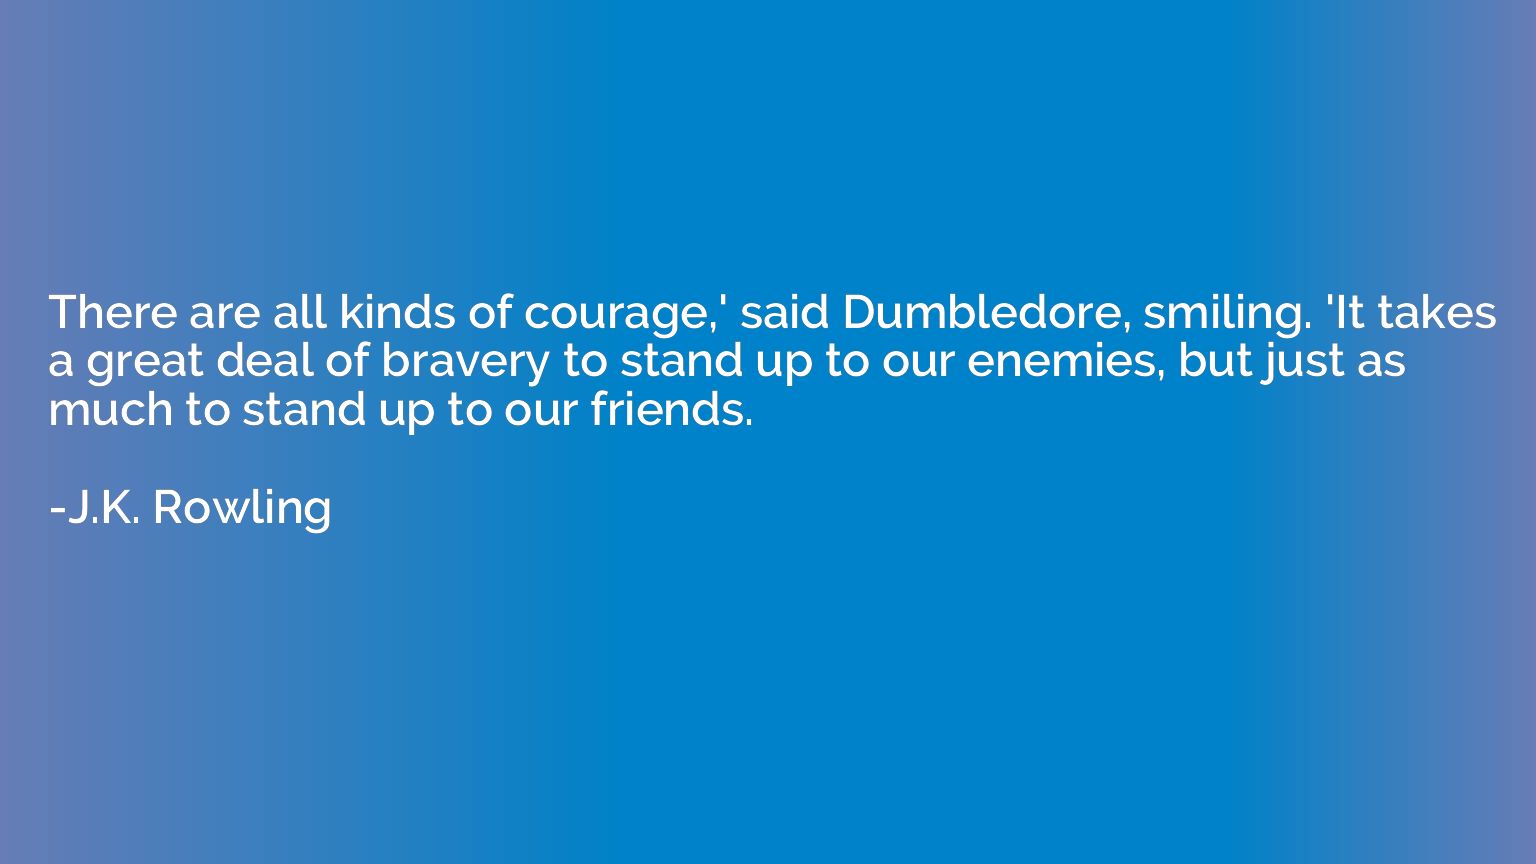 There are all kinds of courage,' said Dumbledore, smiling. '